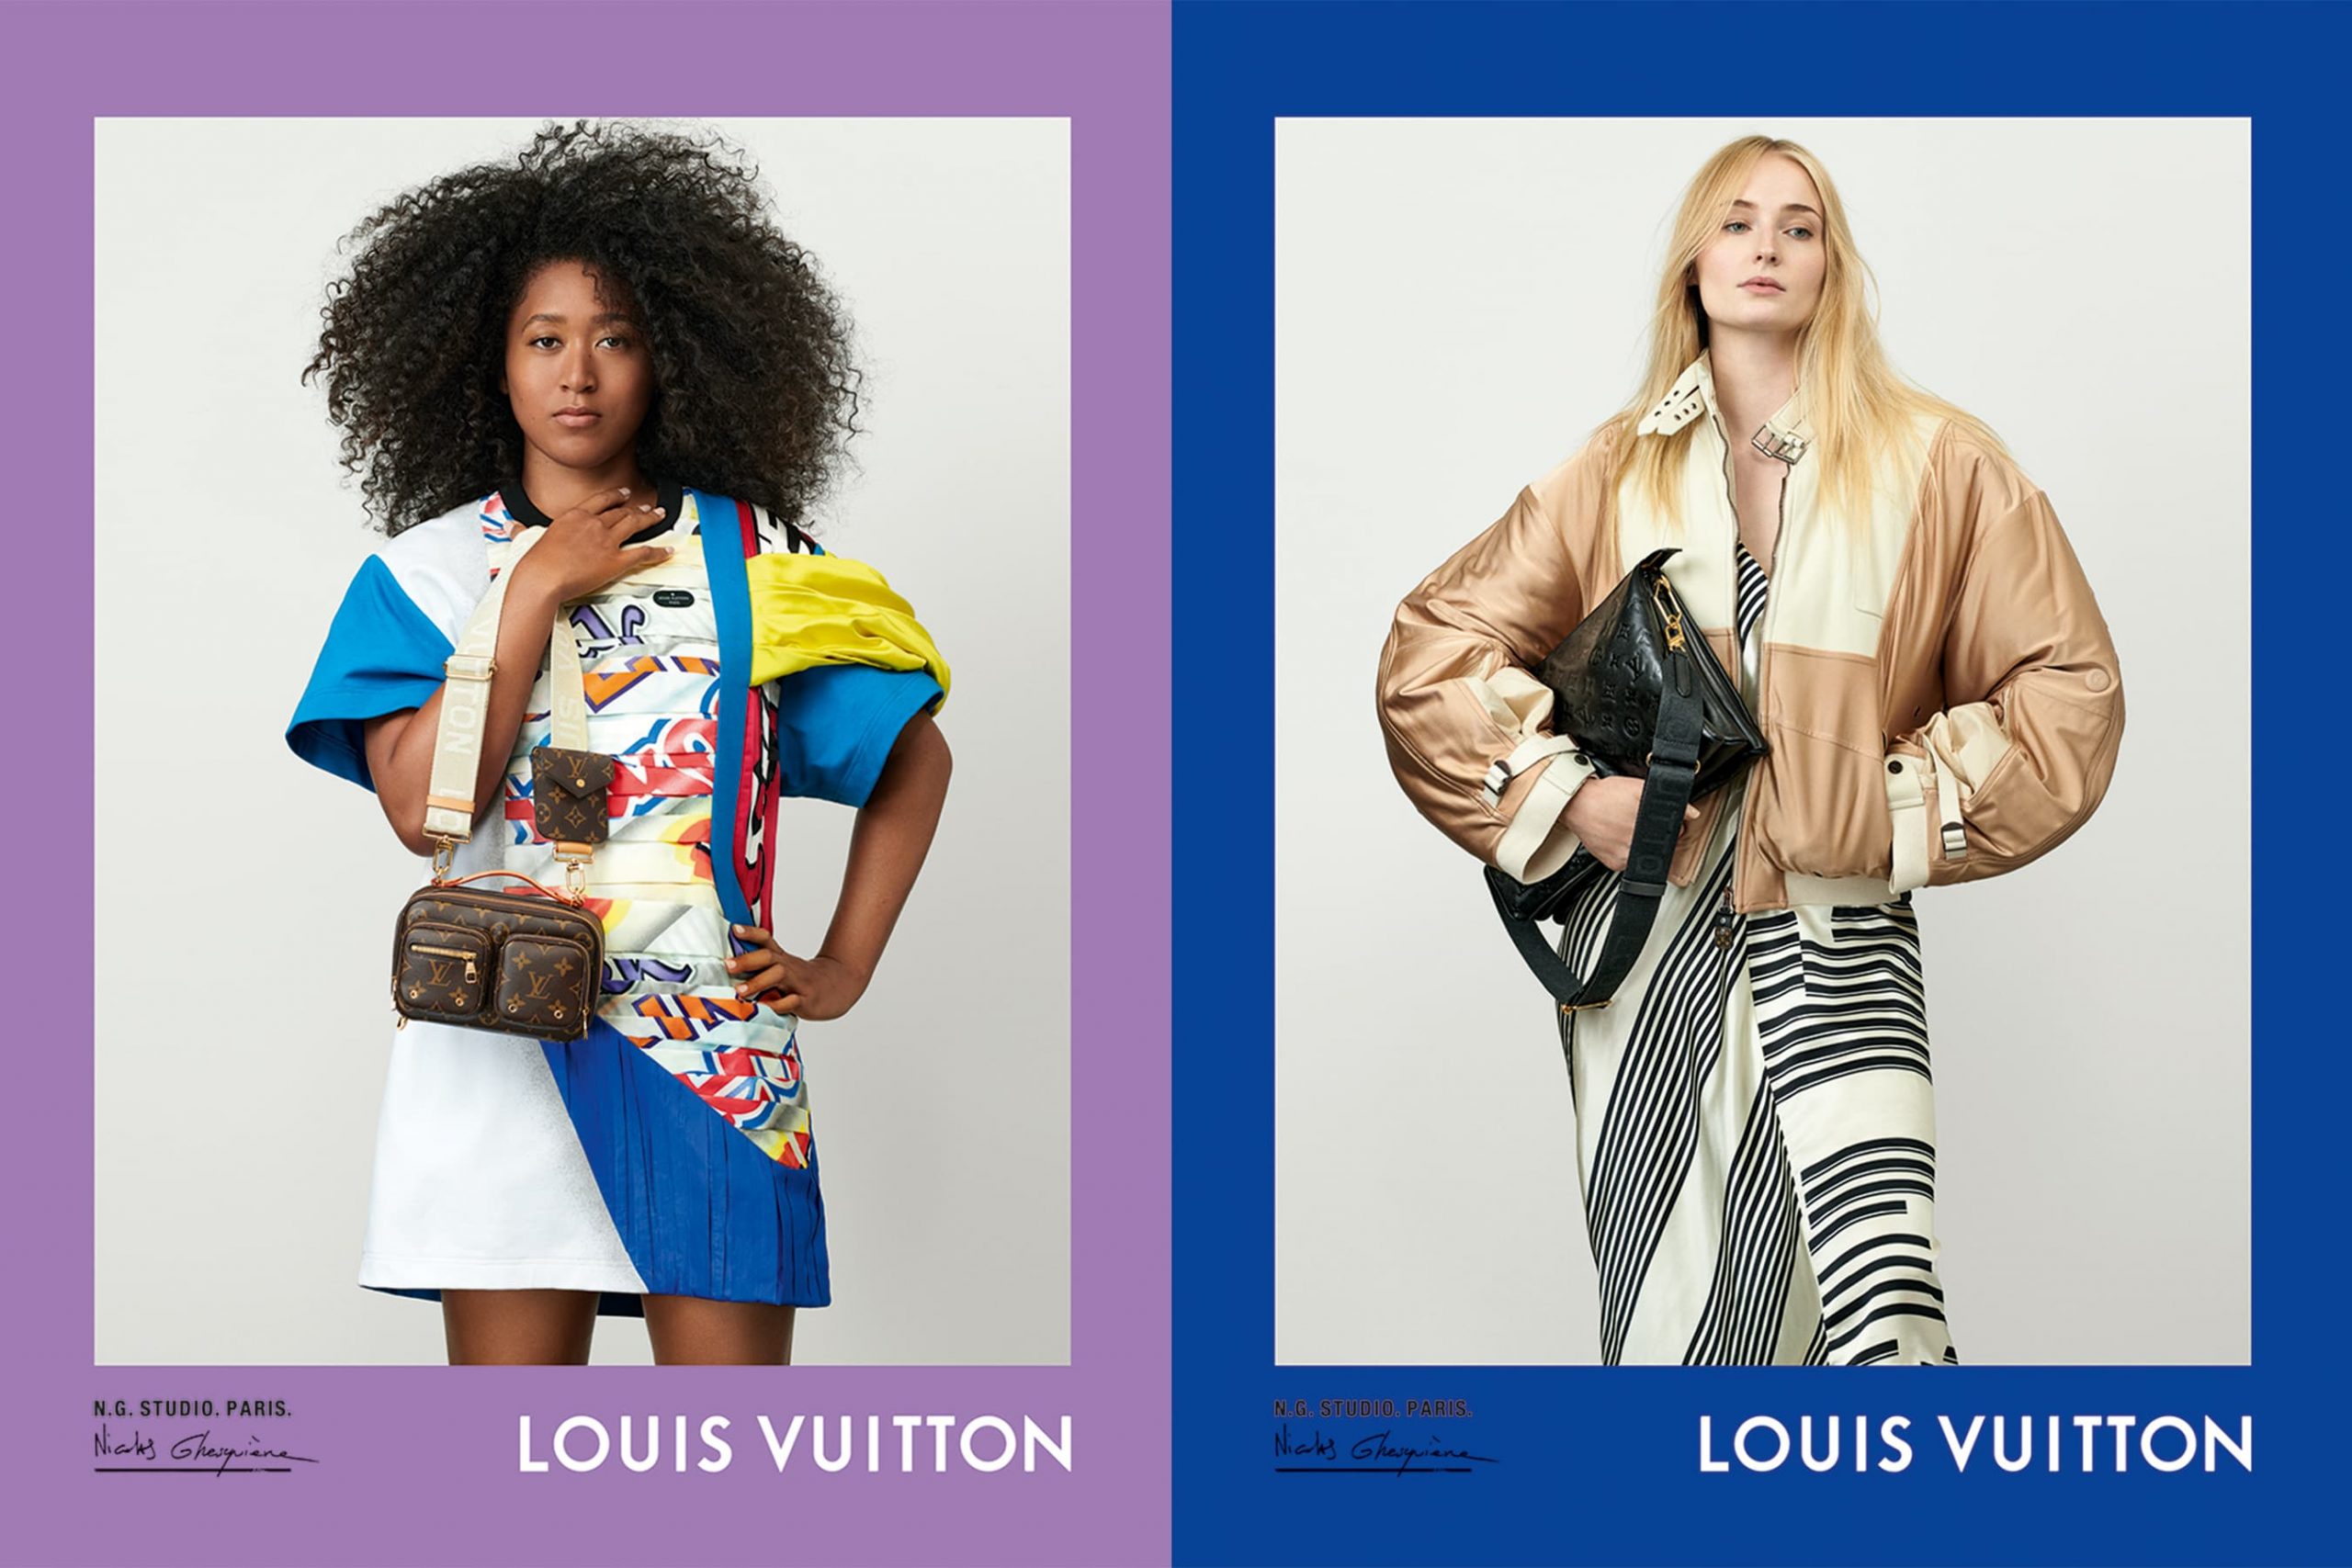 Louis Vuitton Advertising Strategy Why is LV so popular